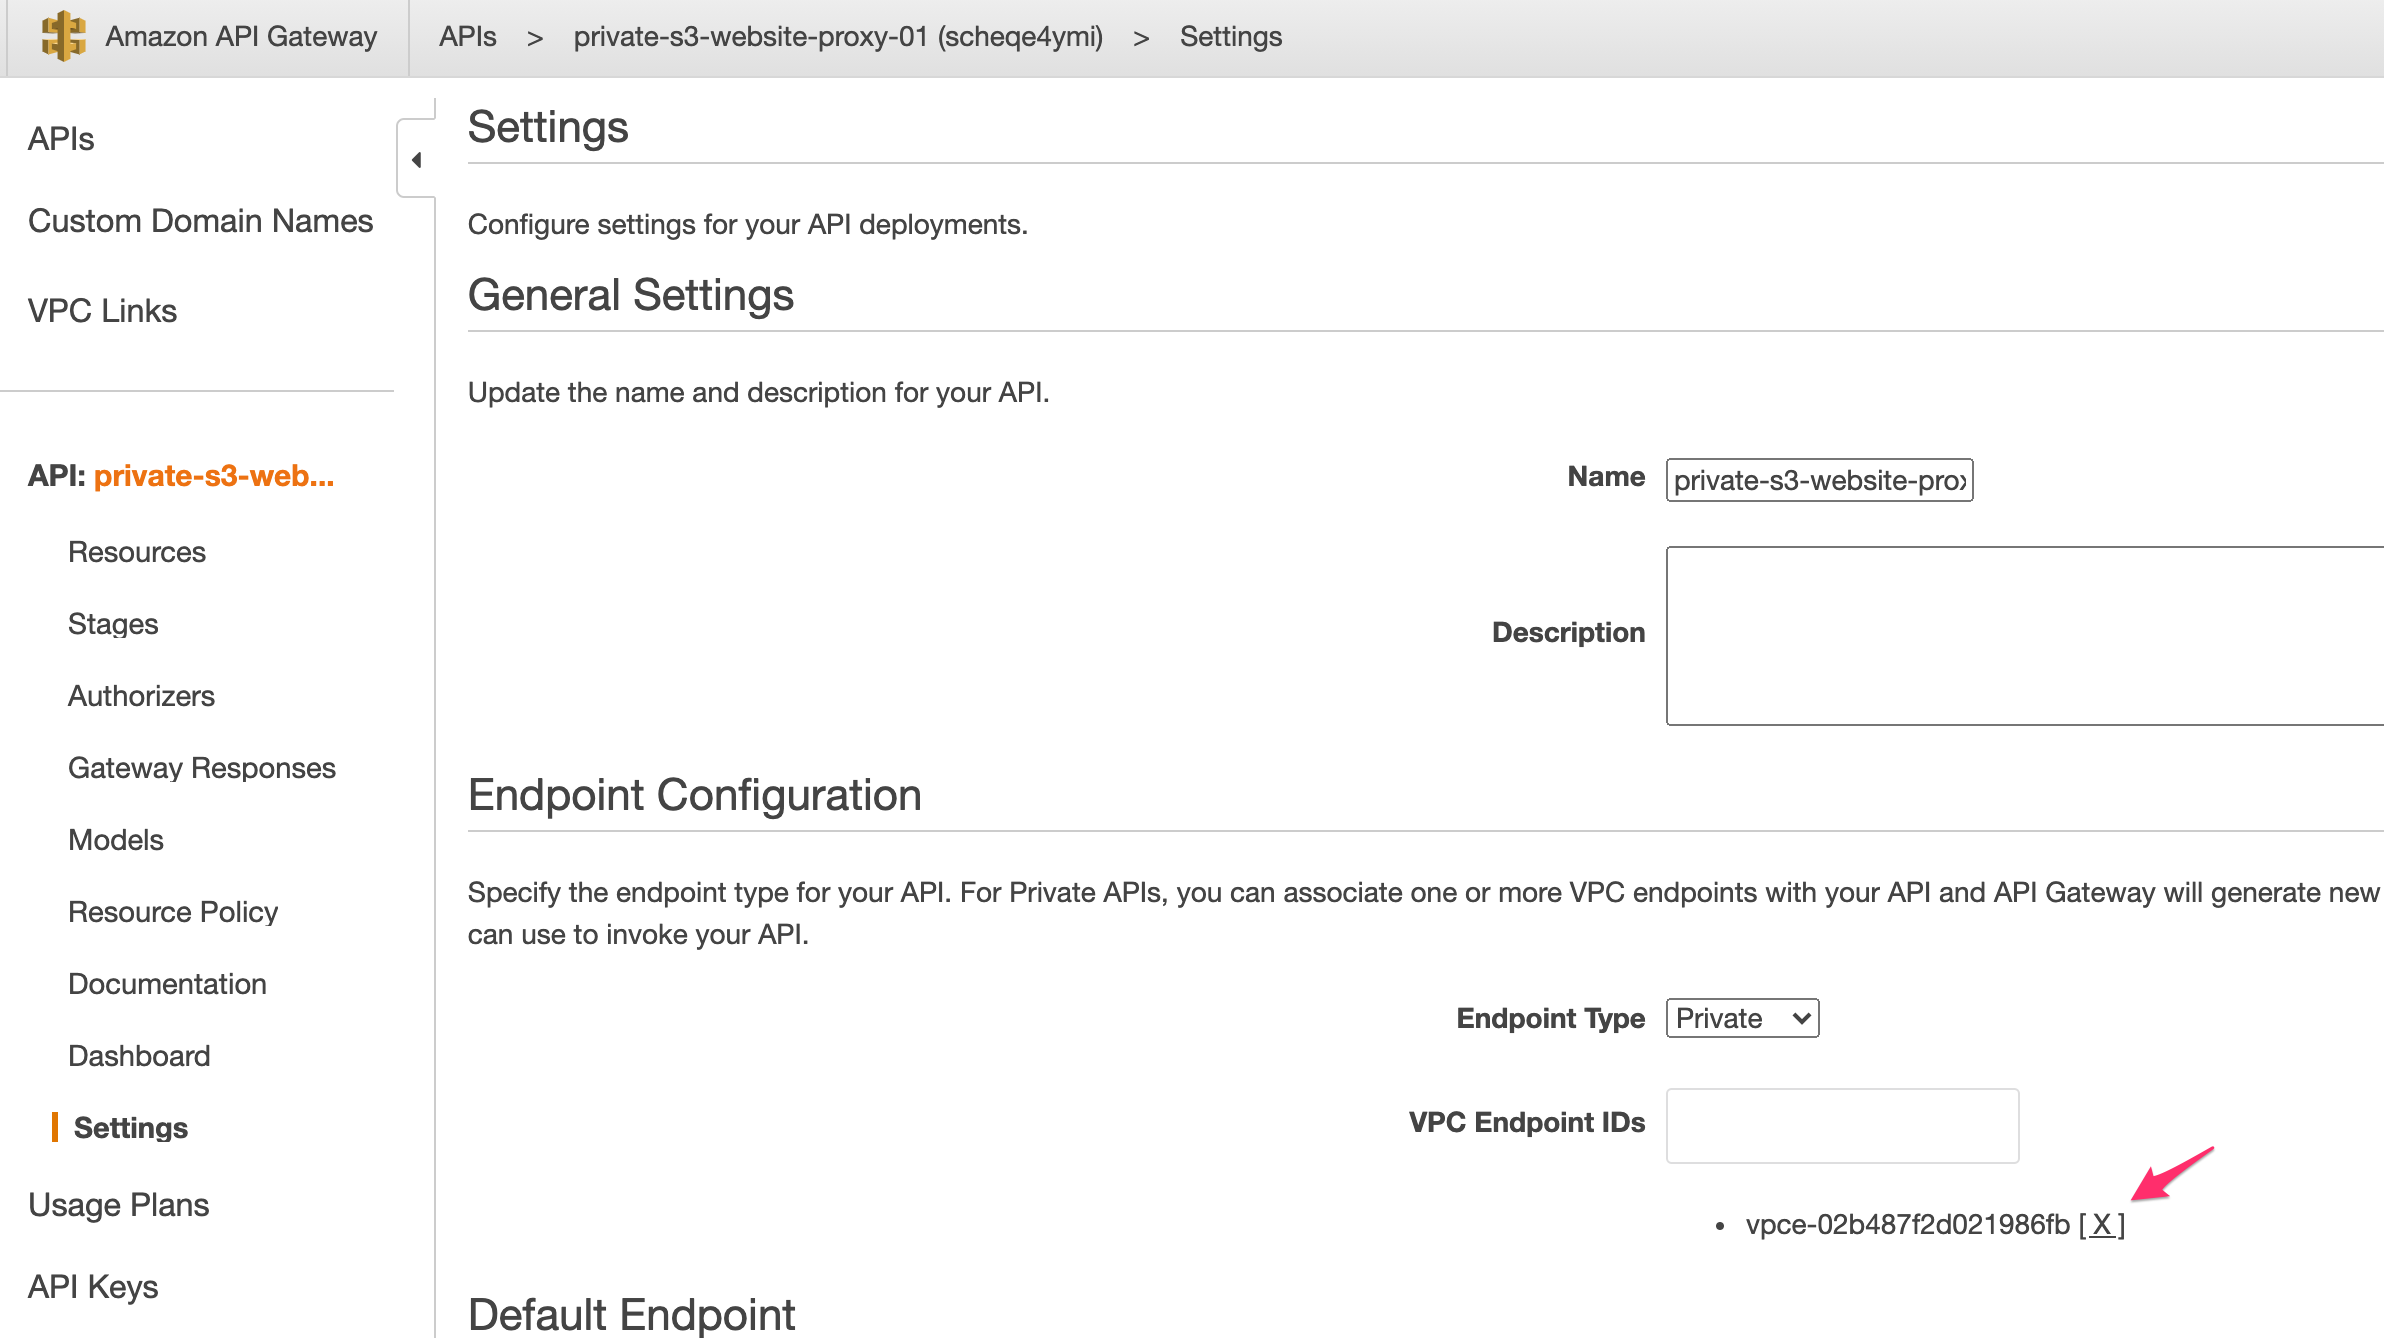 allowed vpc endpoint ids to api gateway